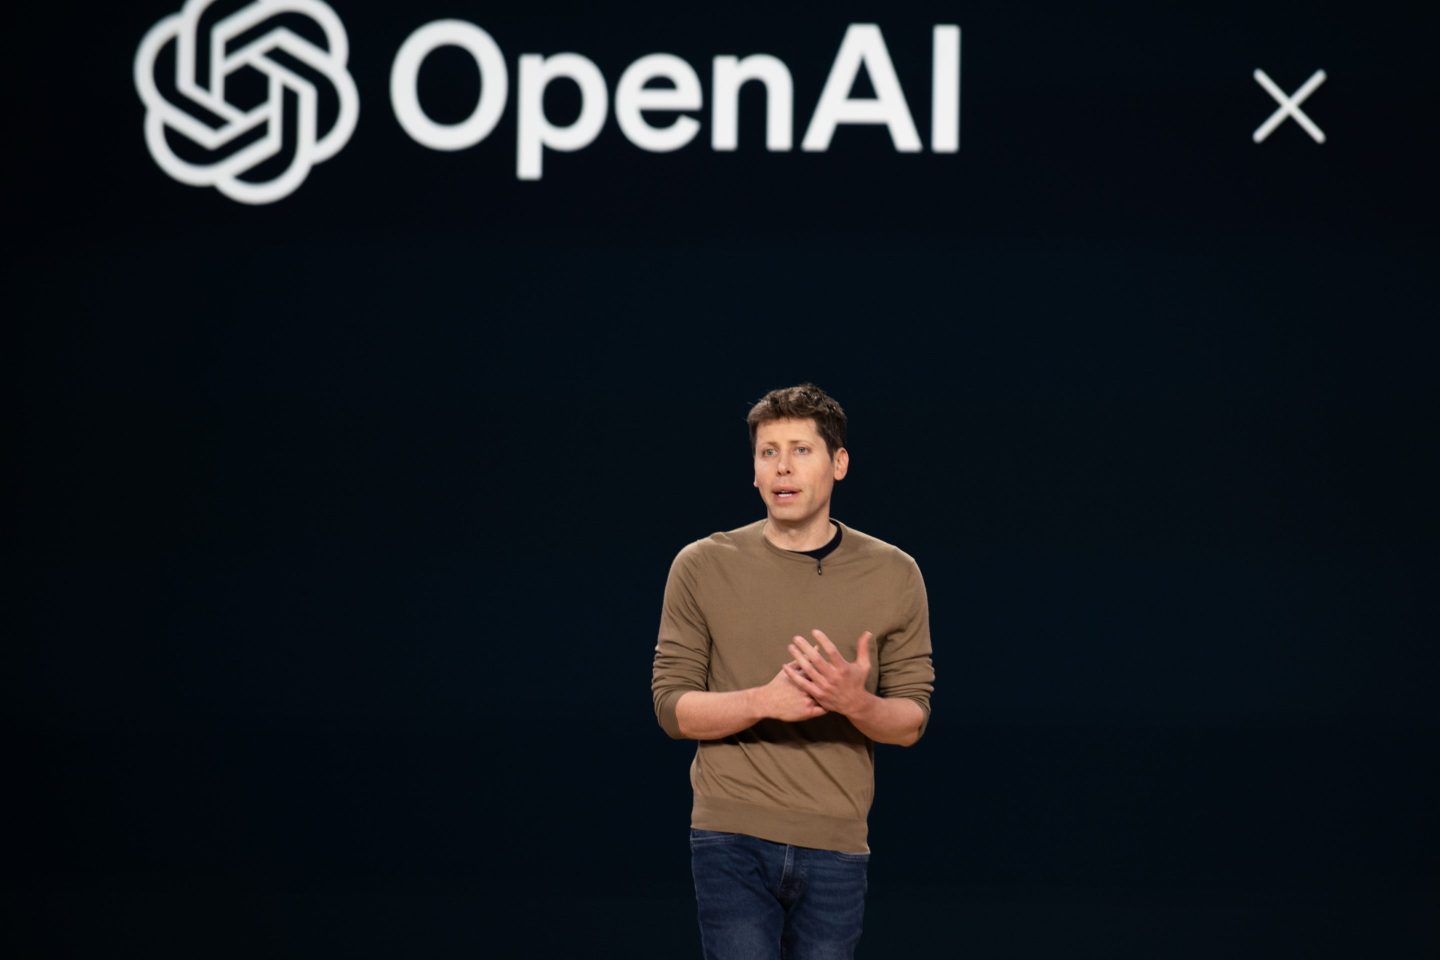 Sam Altman, chief executive officer of OpenAI, speaks at the Microsoft Build event in Seattle, Washington, US, on Tuesday, May 21, 2024. The event allows attendees to grow their skills in topics such as building copilots, generative AI, securing applications, cloud platforms, and low-code. Photographer: Chona Kasinger/Bloomberg via Getty Images